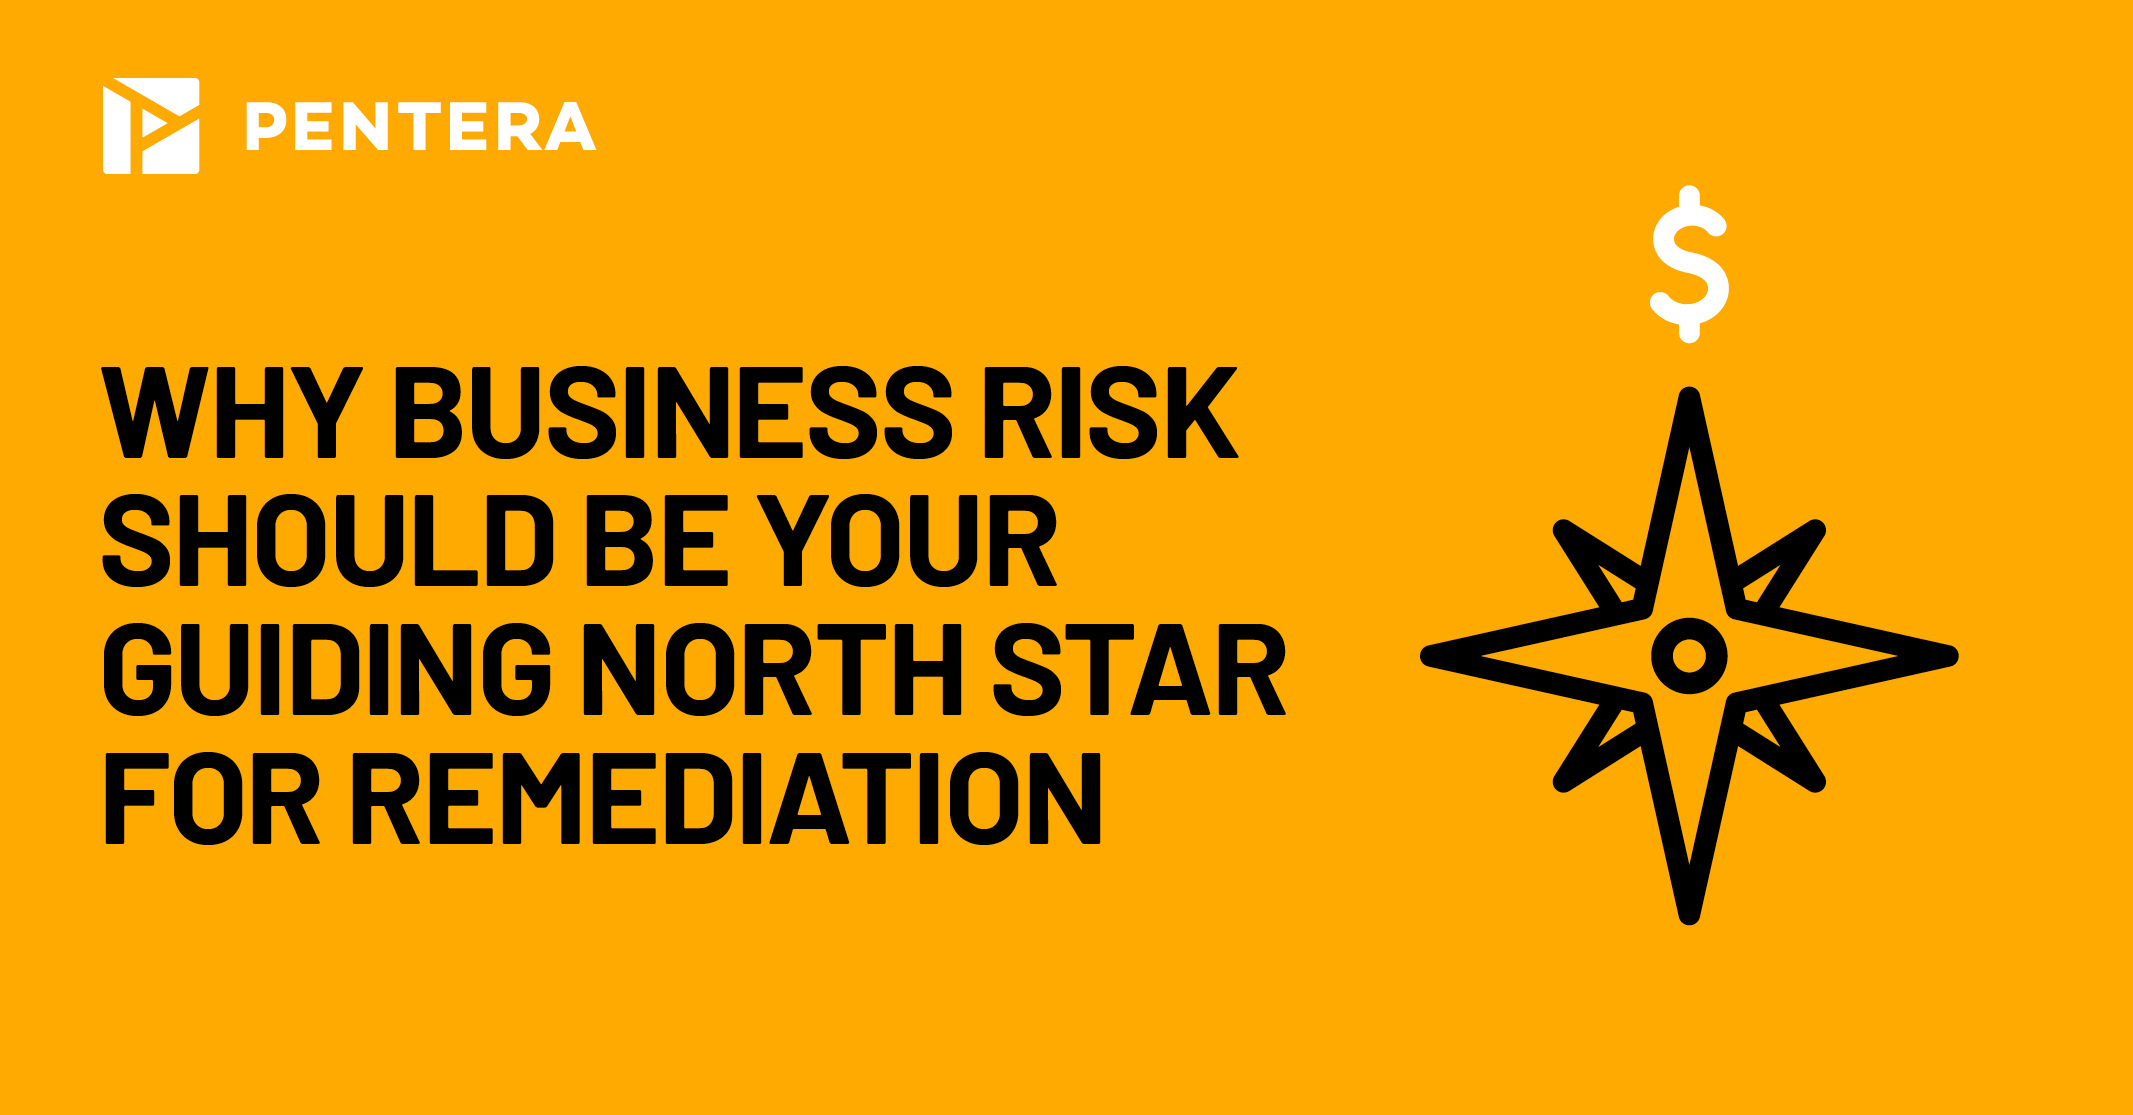 Why business risk should be your guiding north star for remediation